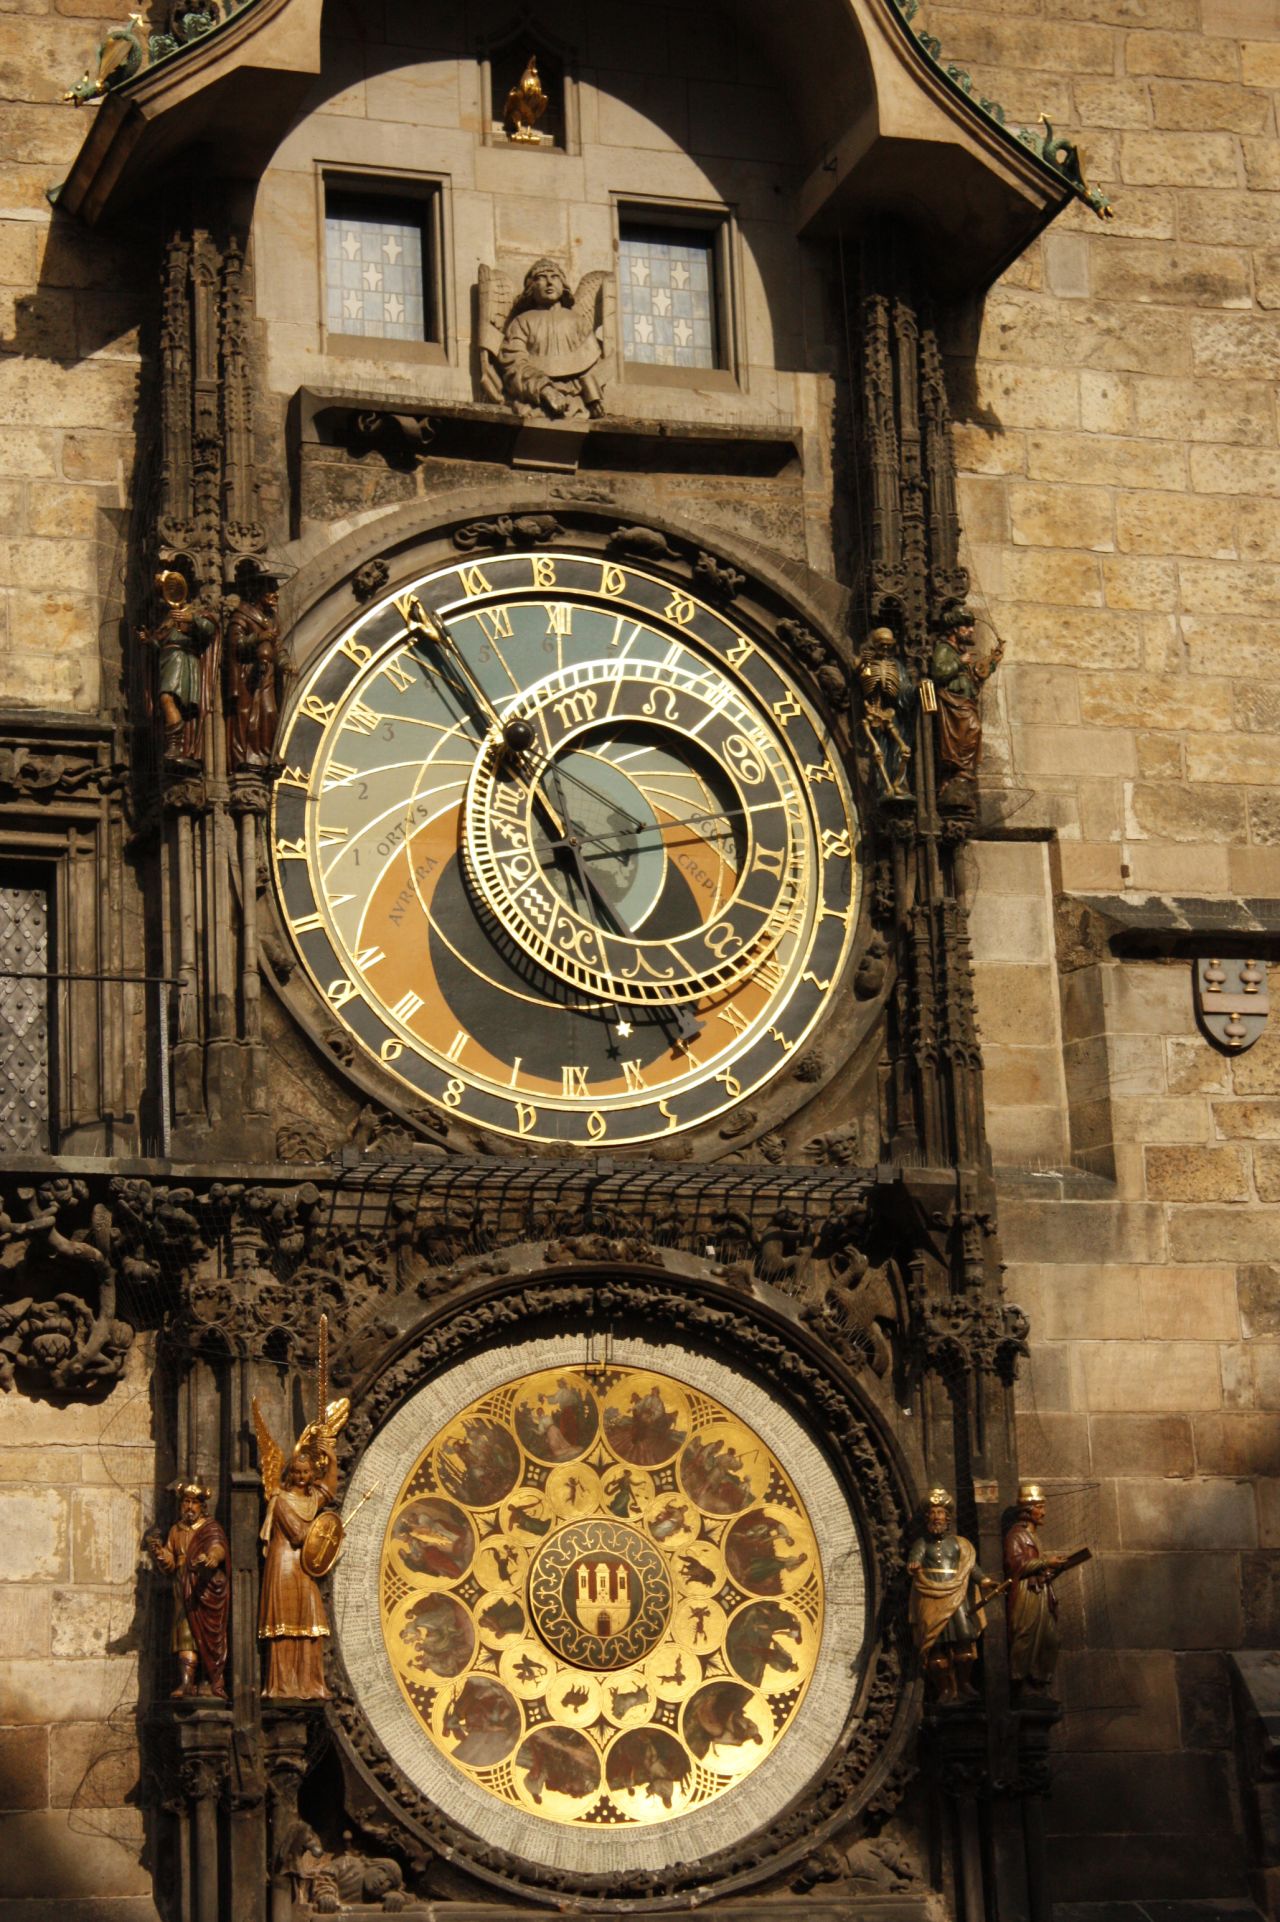 <strong>Old Town Astronomical Clock, Prague, Czech Republic</strong><br /><strong>Completed: </strong>1410<br /><strong>Height: </strong>59 meters (193 feet)<br /><strong>Builders: </strong>Co-built by clockmaker Mikulas of Kadane and Jan Sindel, a mathematics and astrology professor at Charles University in Prague.<br /><strong>Observation deck</strong><br />For $5, visitor can tour the tower and access the observation deck, which sits above the clock.<br /><strong>Special features</strong><br />Each hour from 9 a.m. to 9 p.m., models of the Twelve Apostles are set in motion. Each has a distinctive feature -- St. Peter for example is holding a key (to the Kingdom of Heaven). Other figures standing next to the dial include a Grim Reaper and a man looking into a mirror, representing mankind's vanity.<br /><em>More on Prague's Old Town Astronomical Clock the next slide.</em>